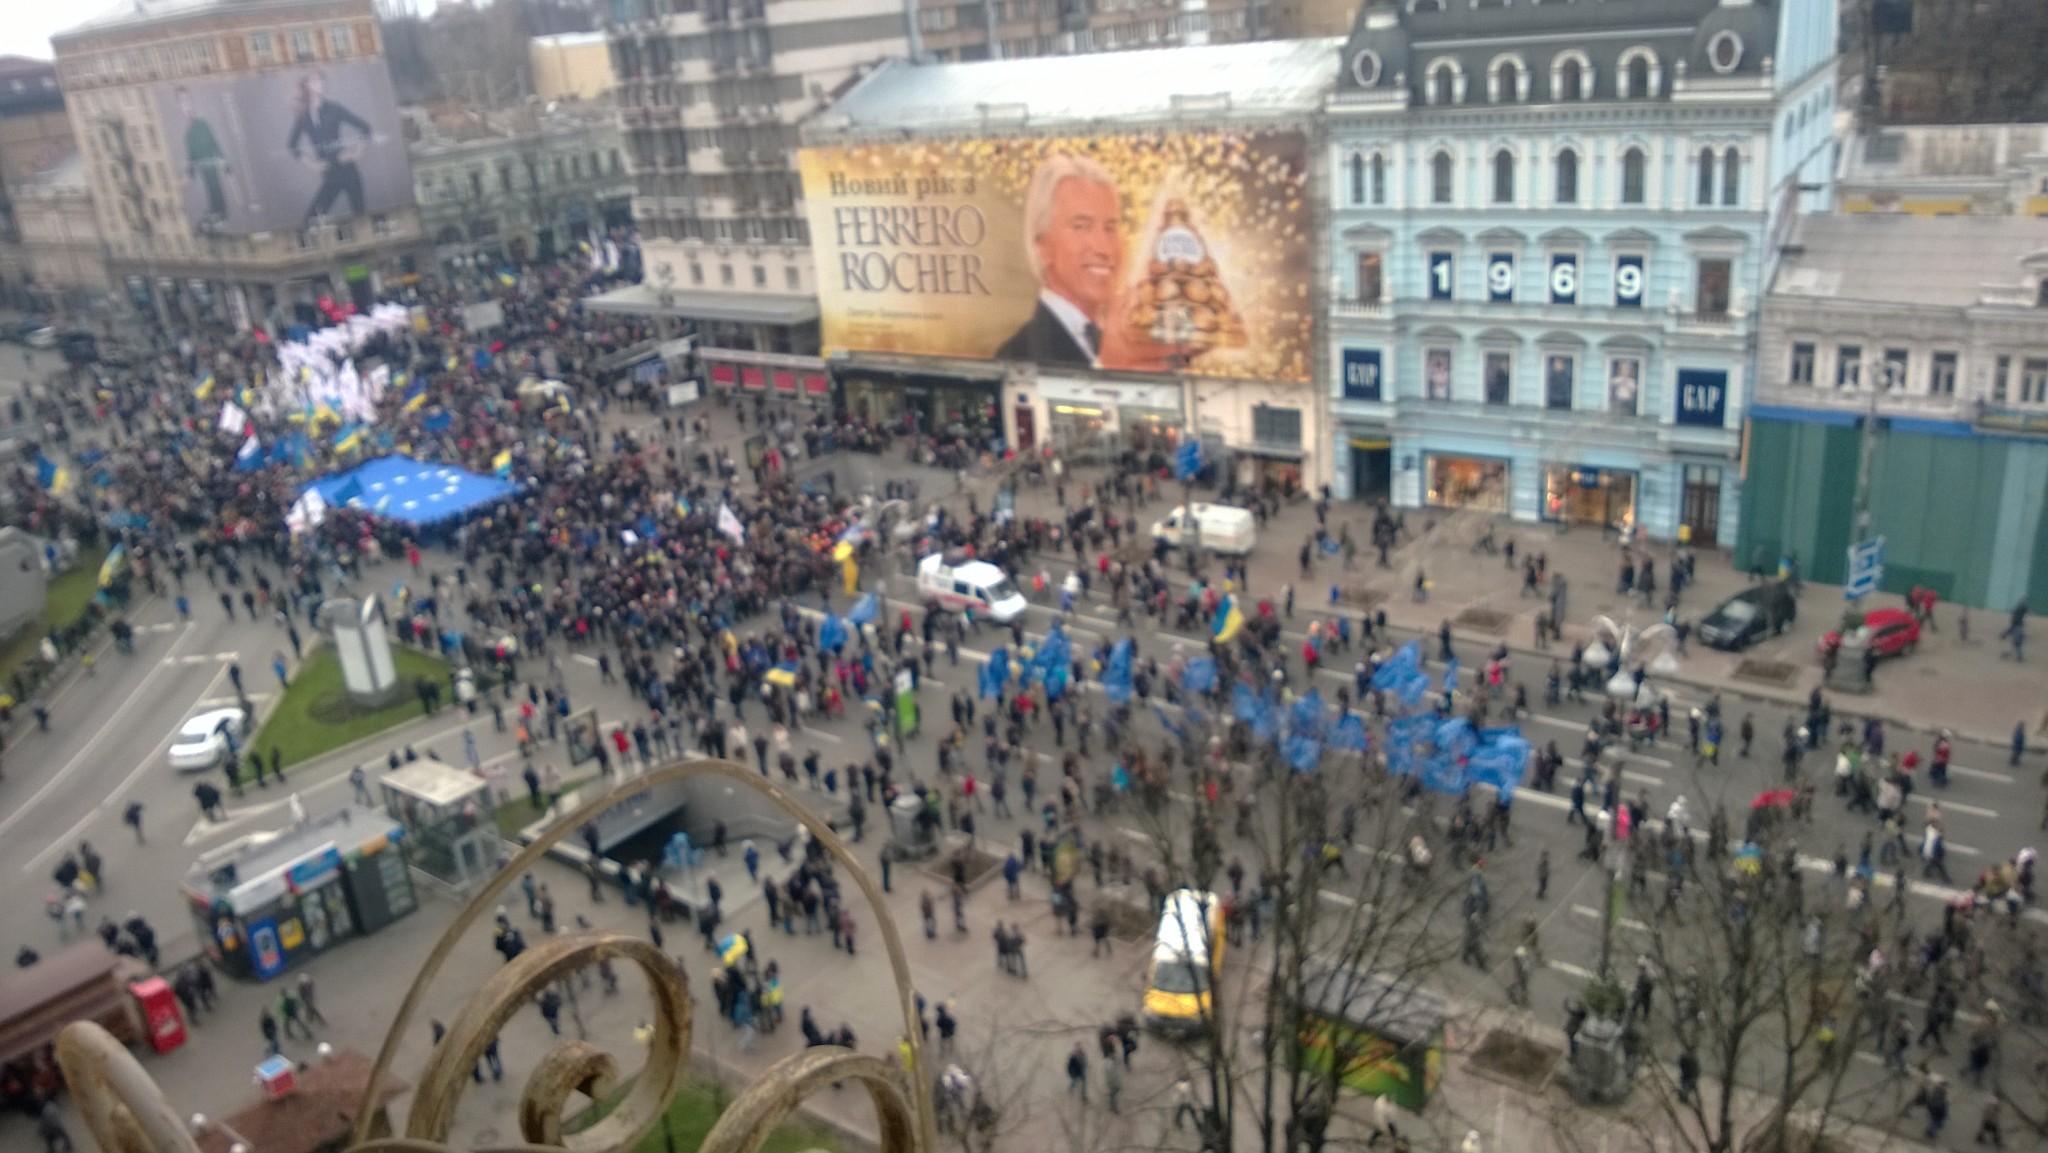 Kyiv's main street Khreshchatyk as seen from Drost's apartment on morning of 1 December 2013.